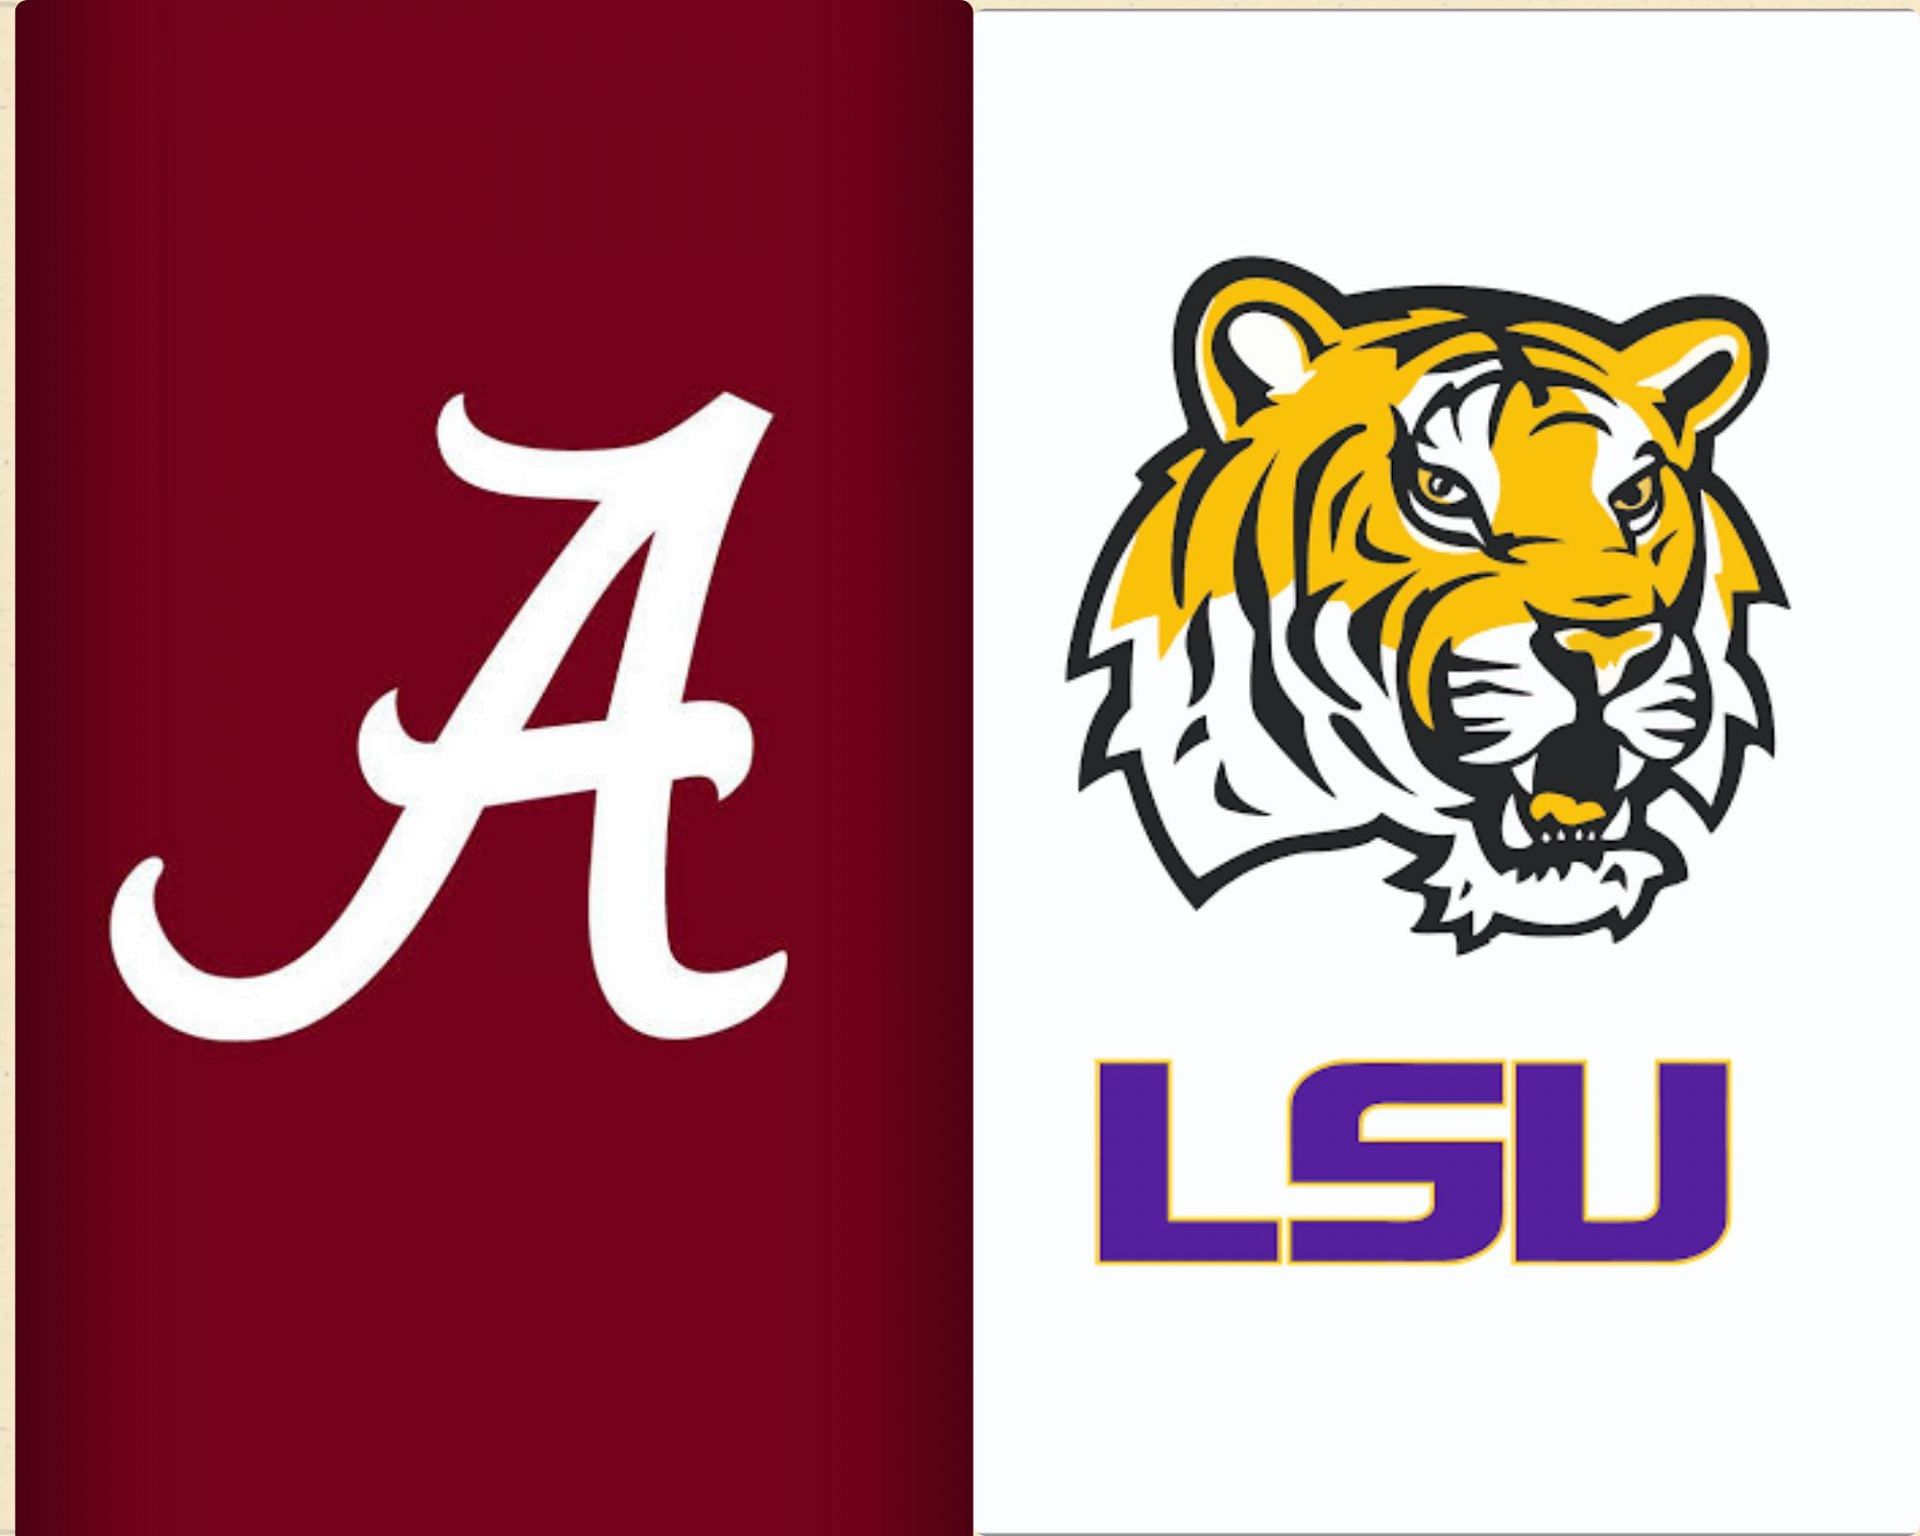 Alabama and LSU faced off in the 2012 BCS National Championship Game 